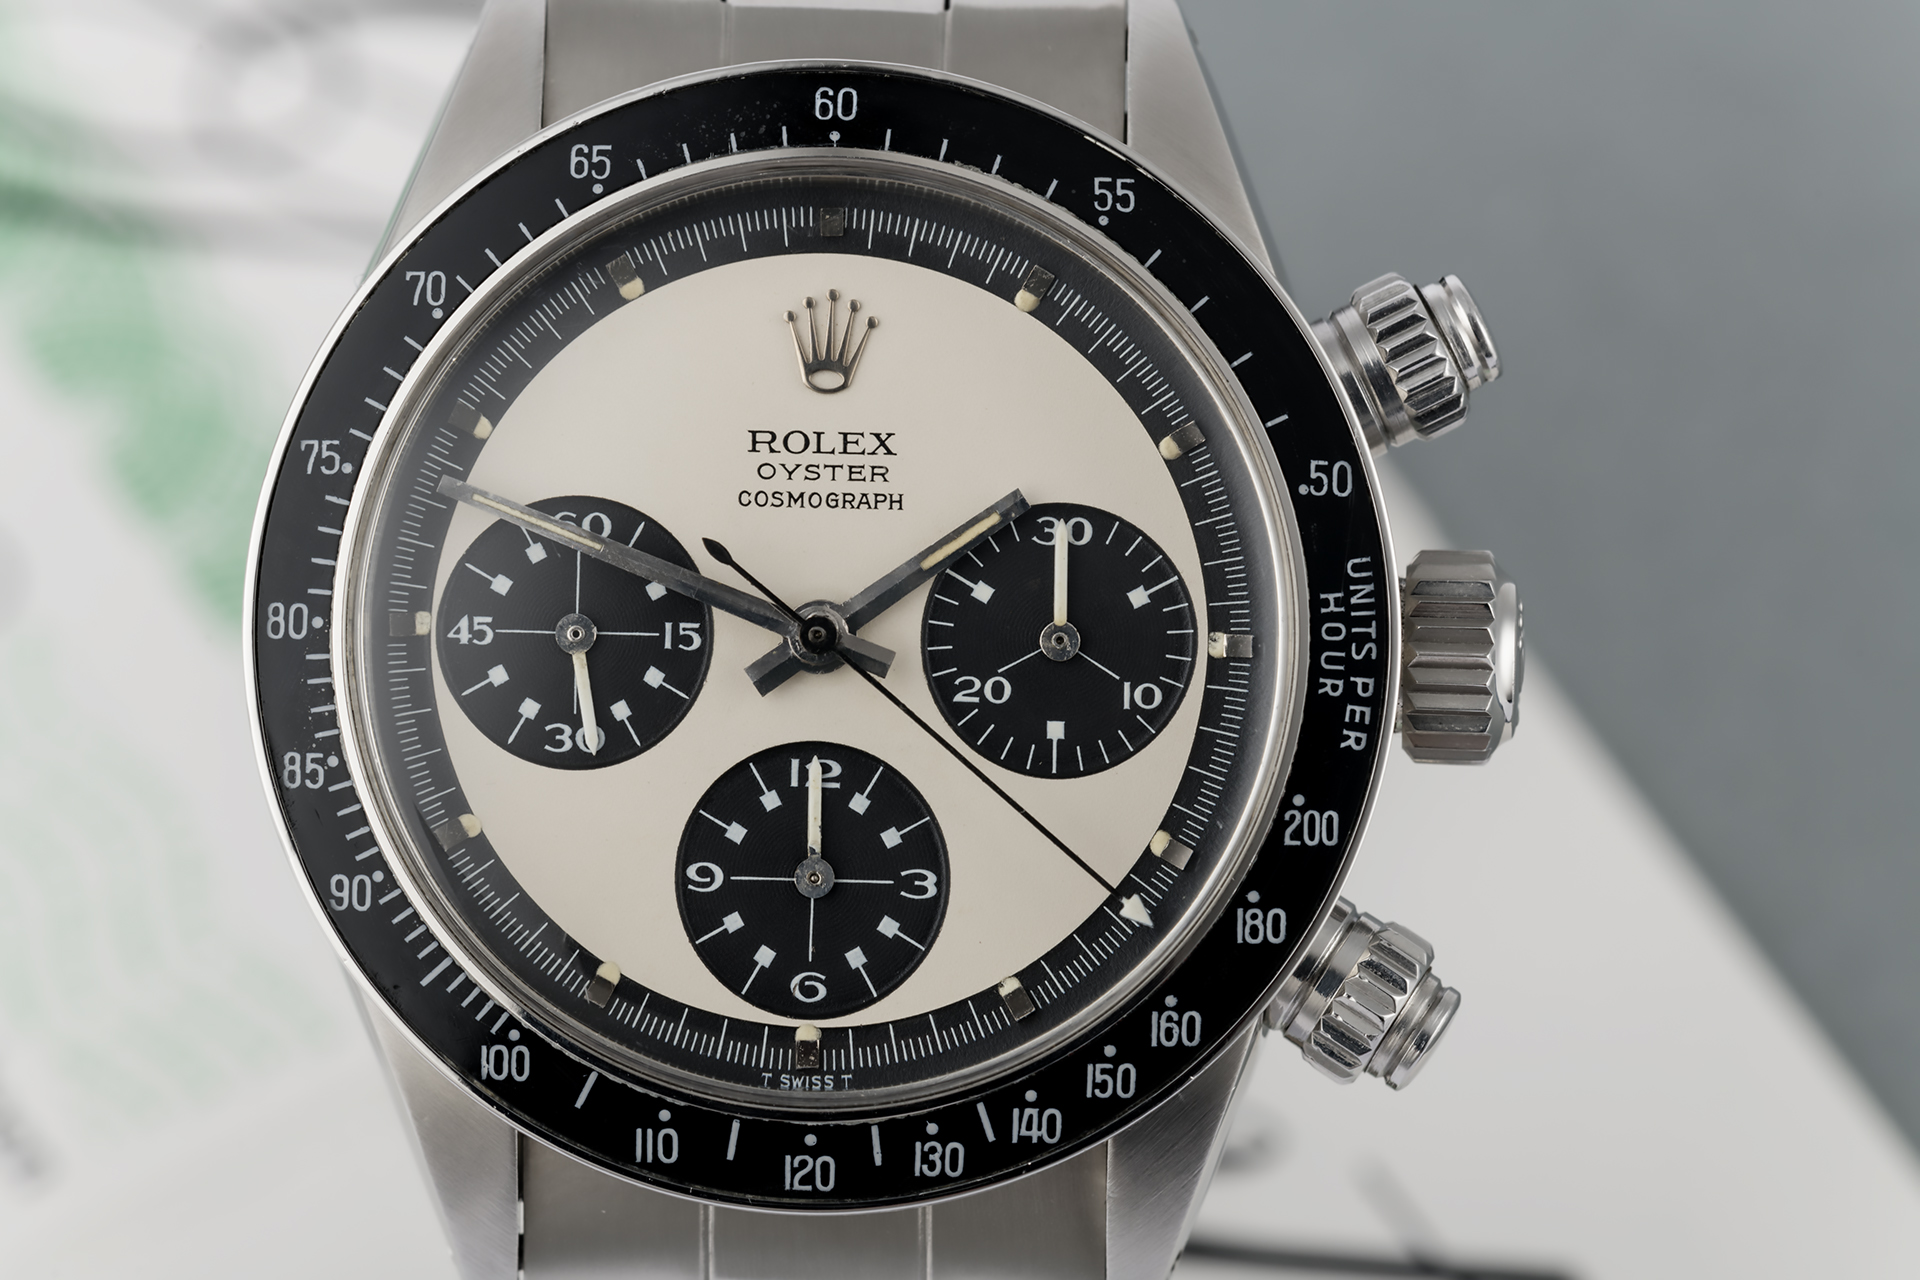 Rolex Cosmograph Daytona Watches | ref 6263 | Extremely Rare | The ...